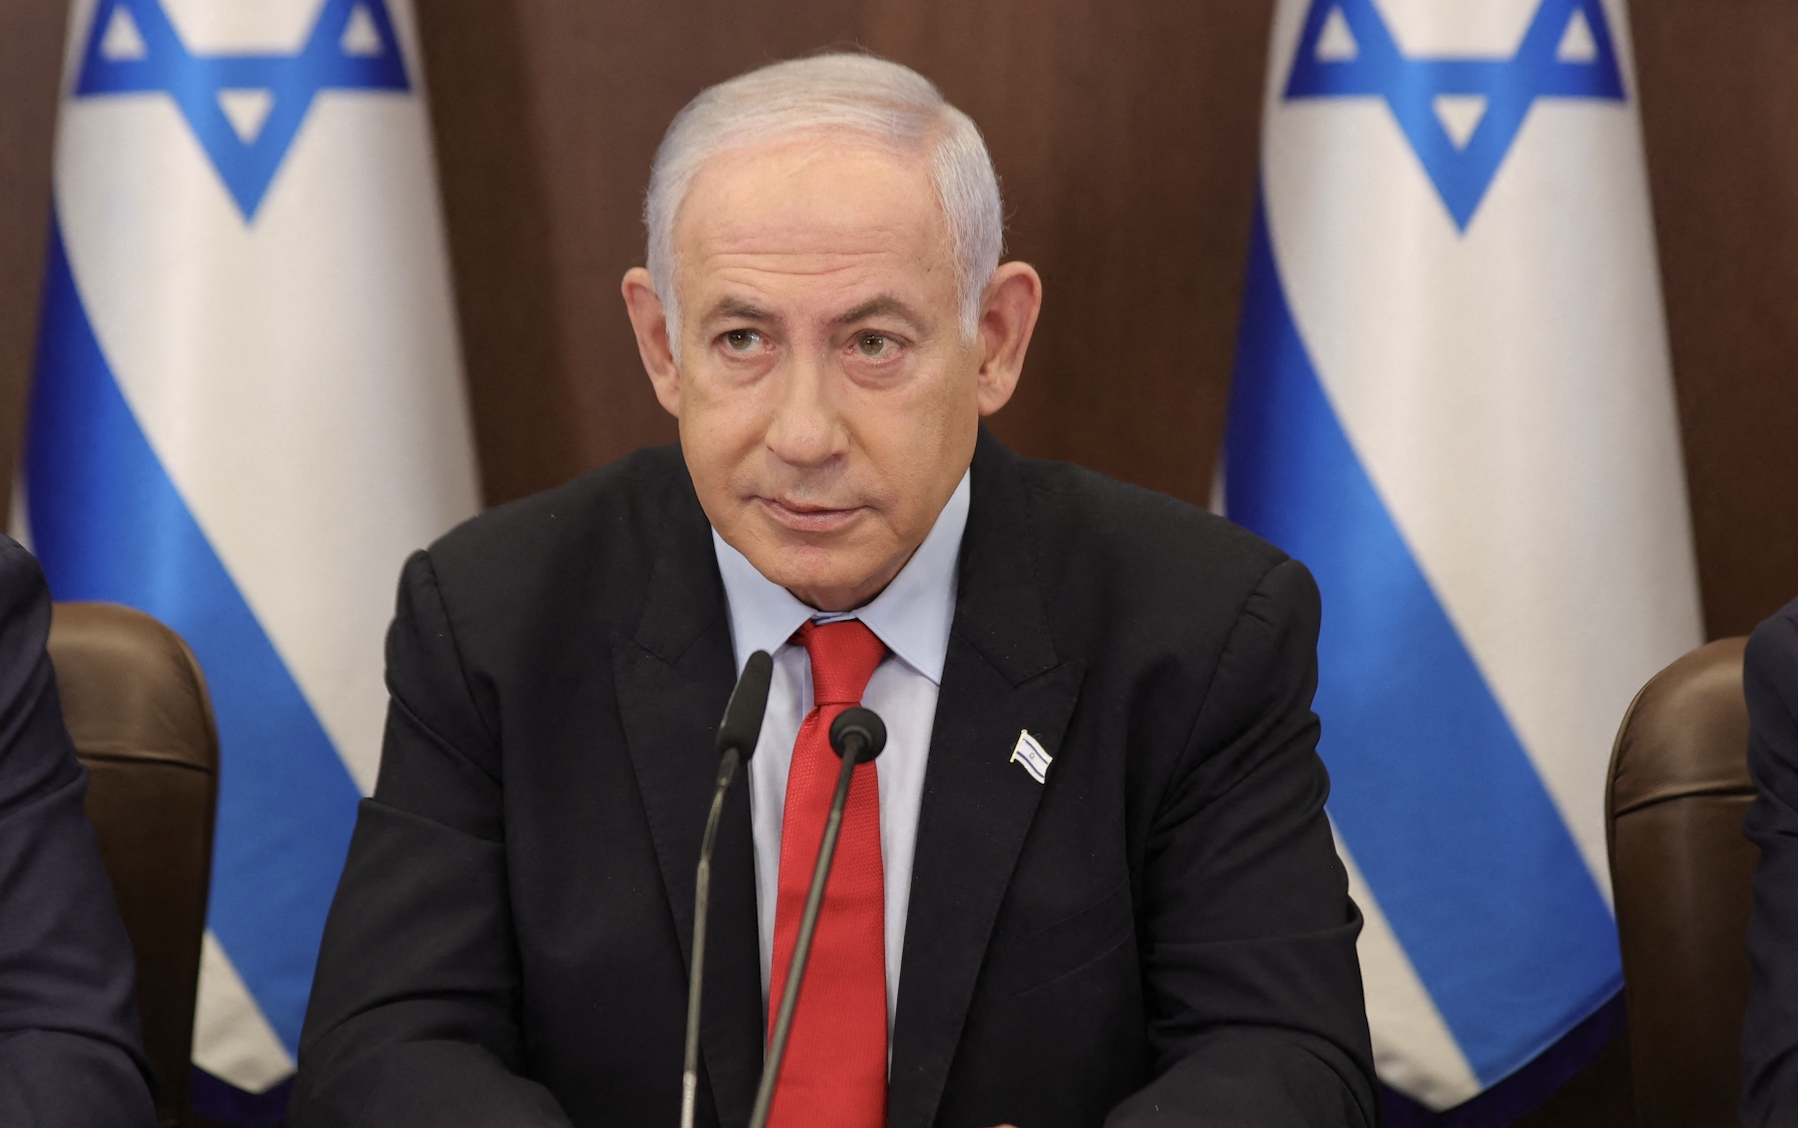 Netanyahu warns: Israel’s military response will be remembered for generations by those who attacked us.